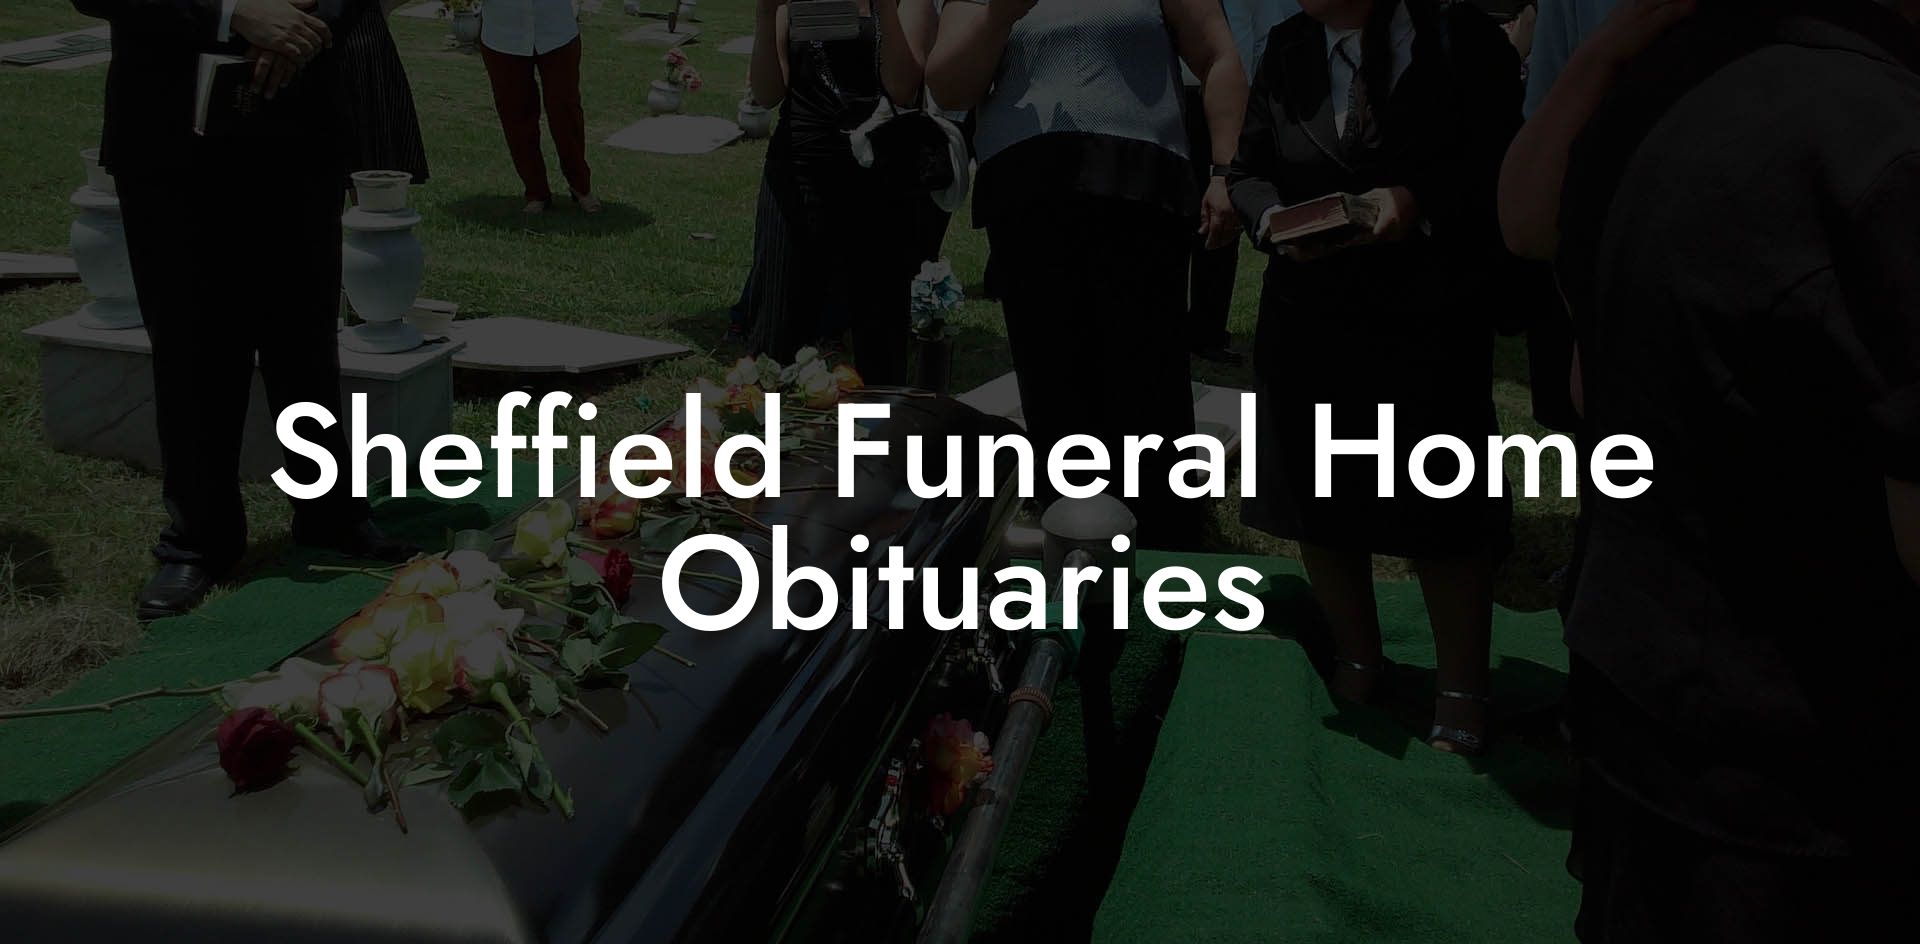 Sheffield Funeral Home Obituaries